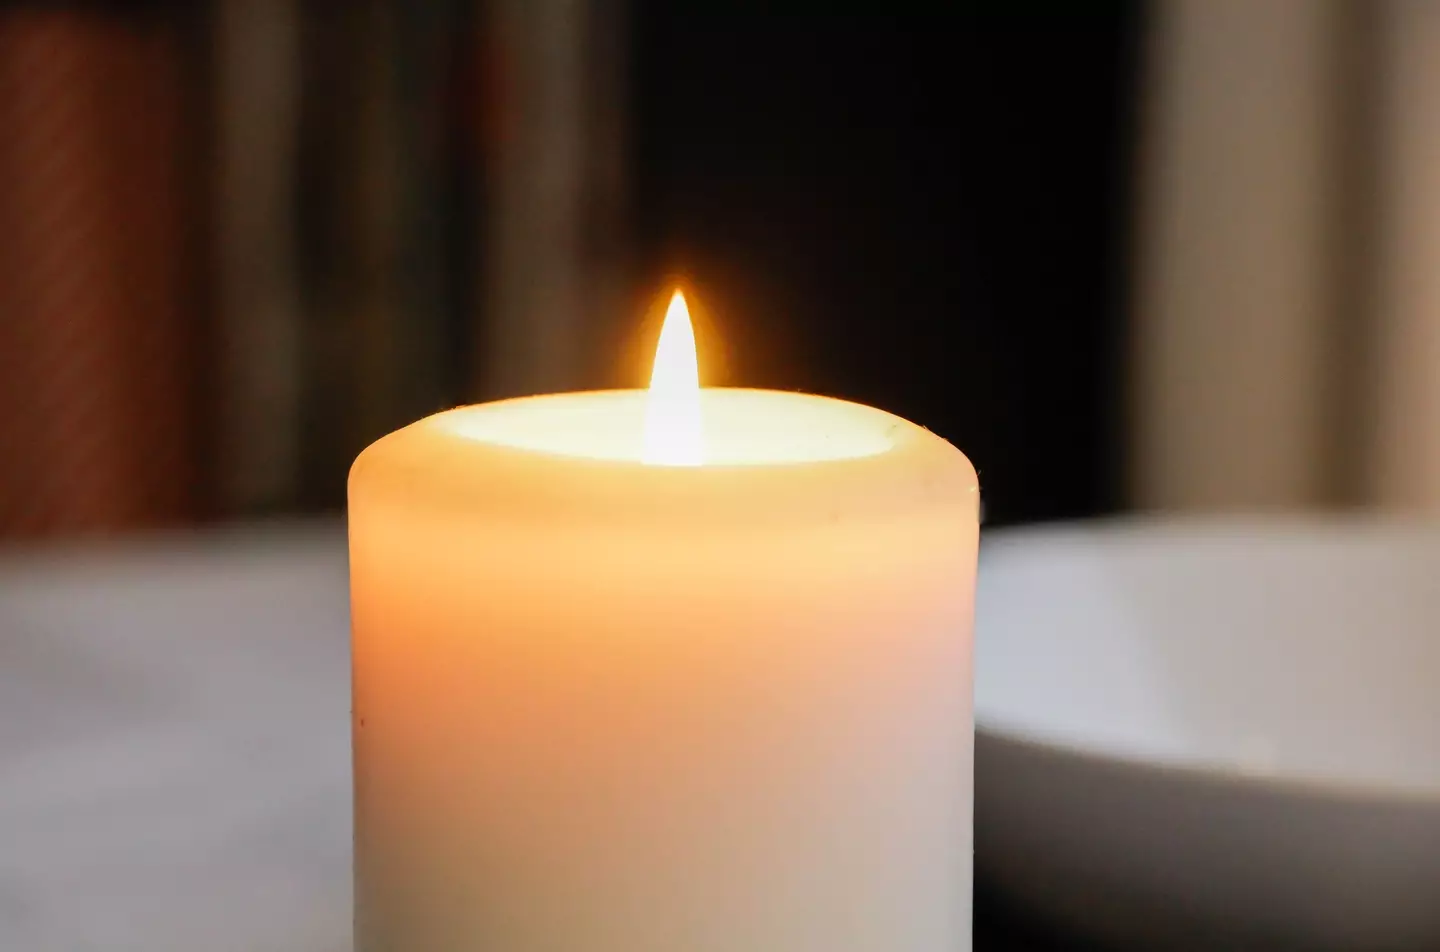 One doctor warned against using scented candles indoors.